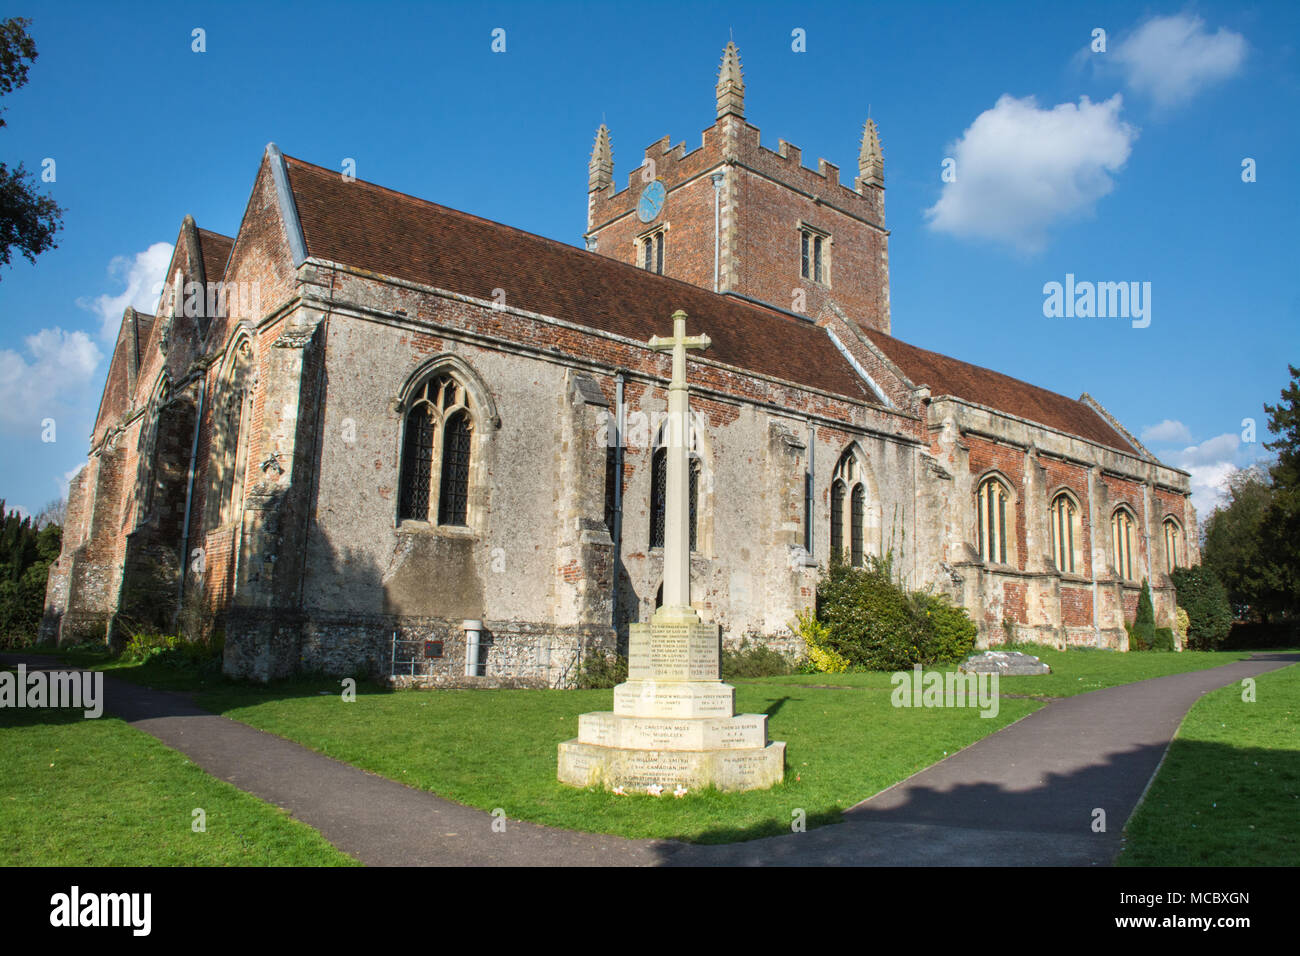 St Mary's Church in Old Basing village, Hampshire, UK, during Spring Stock Photo